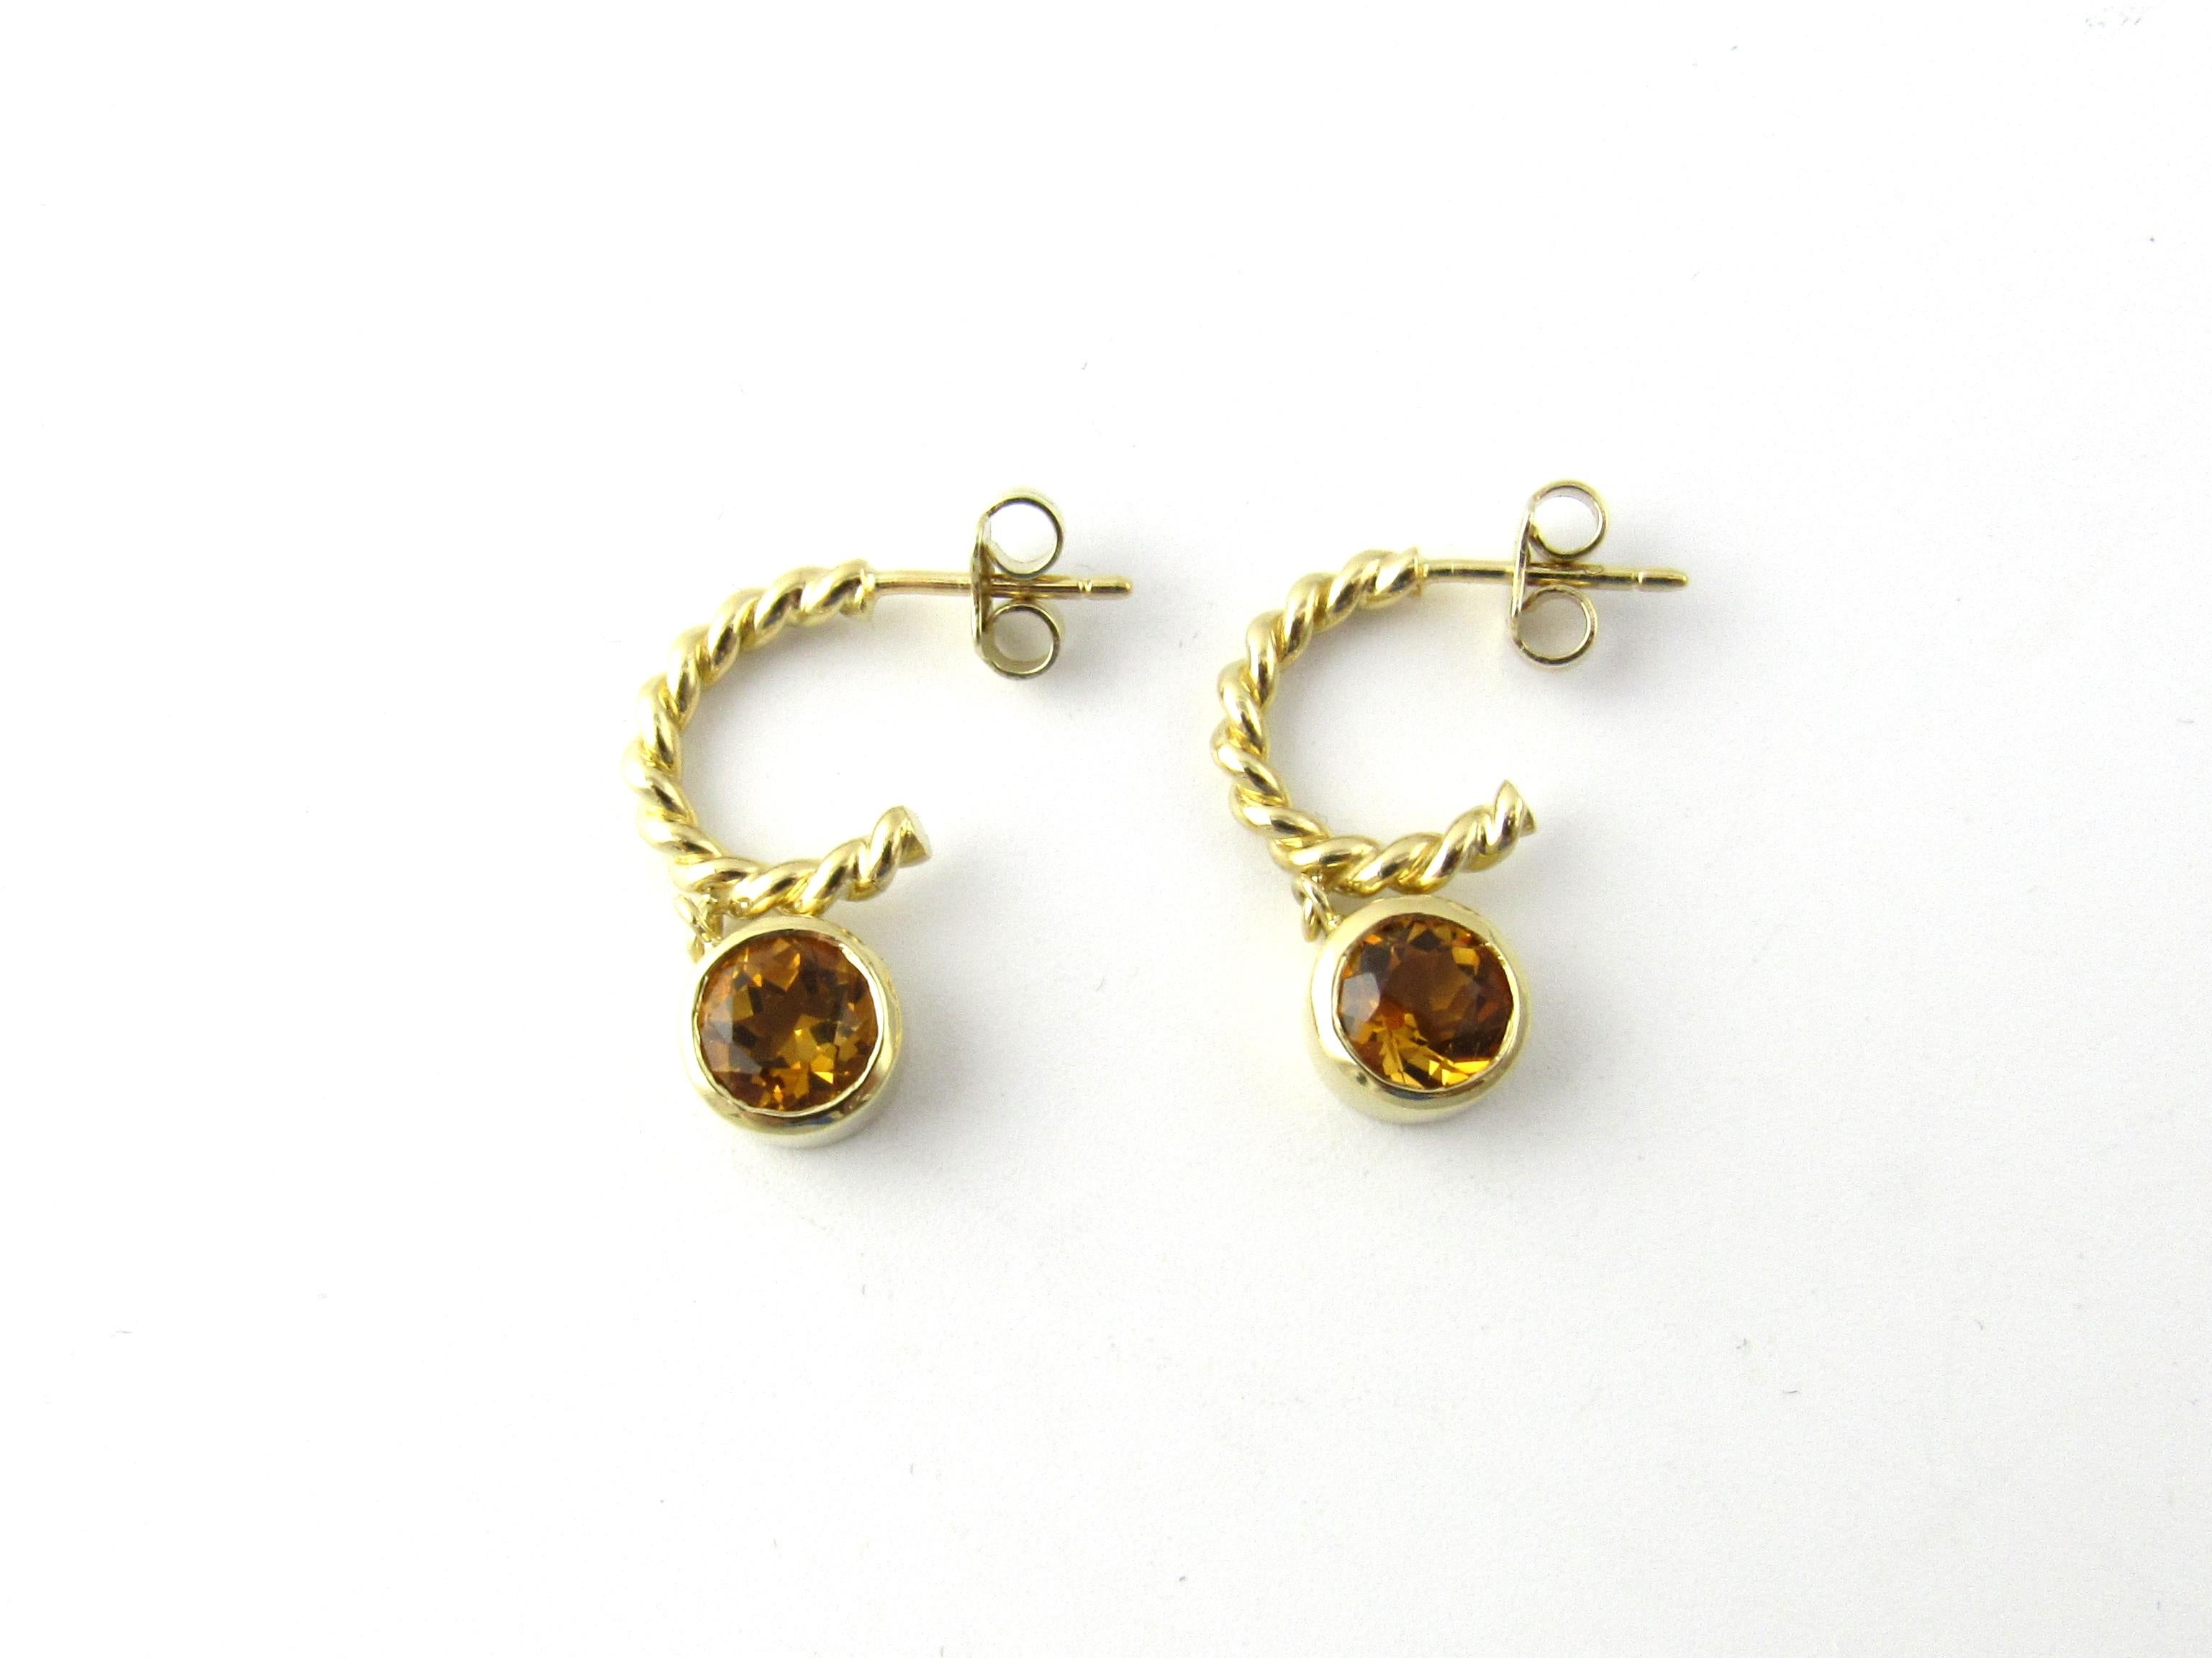 Tiffany & Co. 18K Yellow Gold Twisted Rope Citrine Earrings

These authentic Tiffany earrings are mini twisted rope hoops with bezel set dangling citrine stones.

The hoops are approx. 2mm wide and 13mm in length.

Faceted citrine stones are are